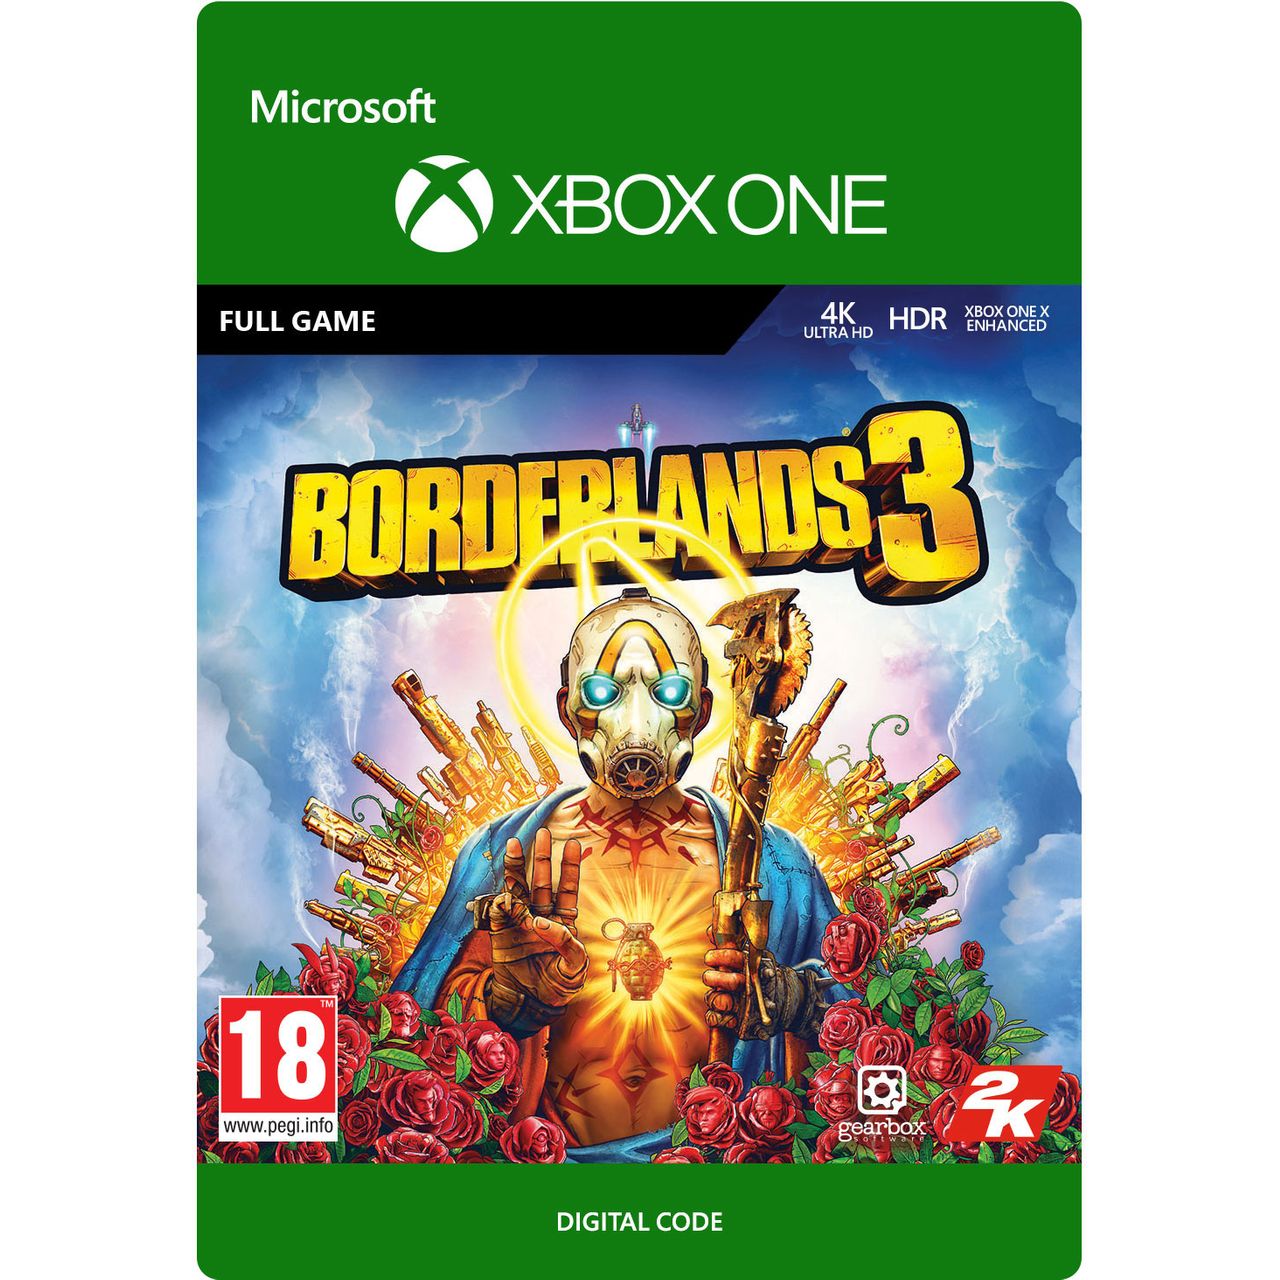 Borderlands 3 for Xbox One [Enhanced for Xbox One X] Review